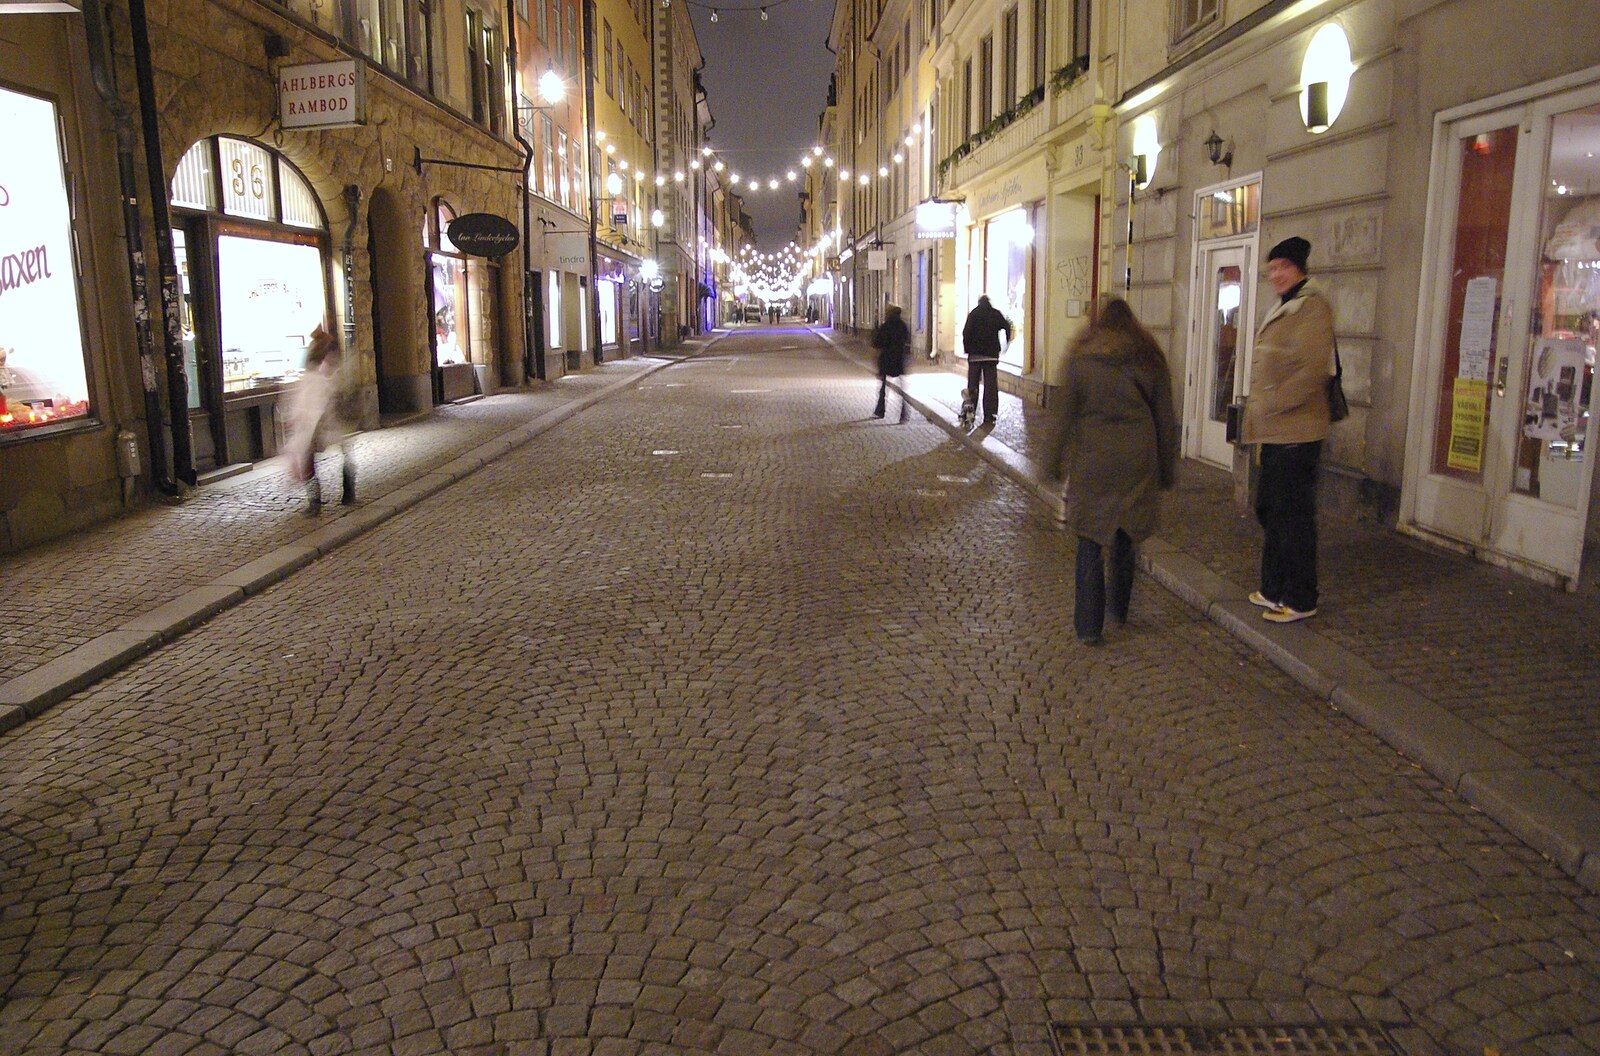 We're back on the cobbled streets of Gamla Stan from A Few Hours in Skansen, Stockholm, Sweden - 17th December 2007